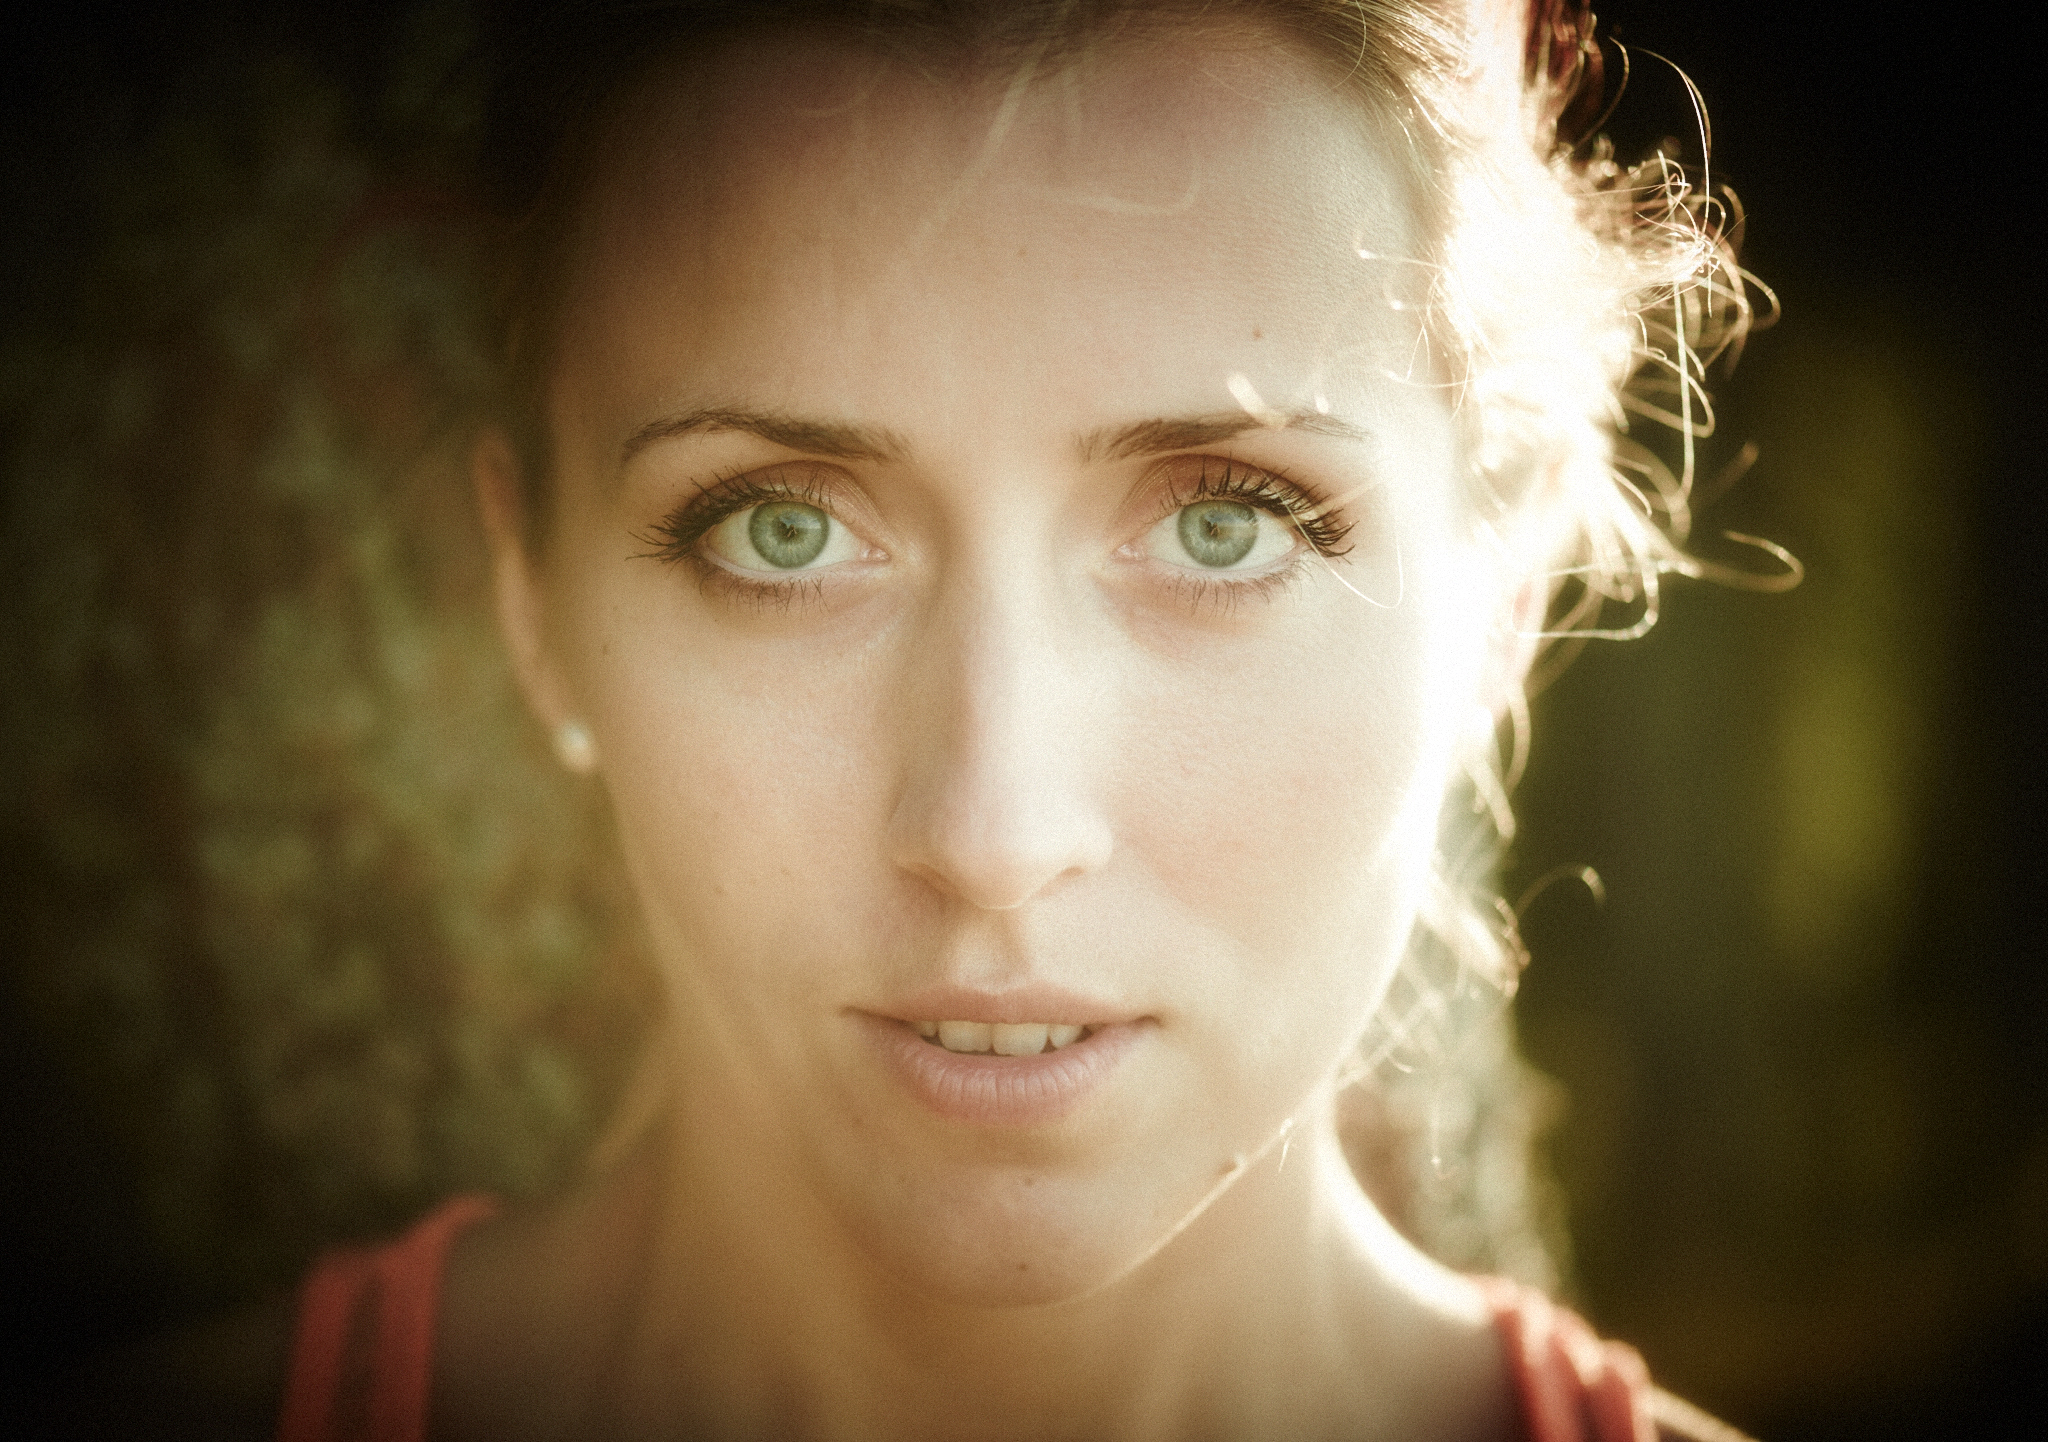 a woman with green eyes looks at the camera